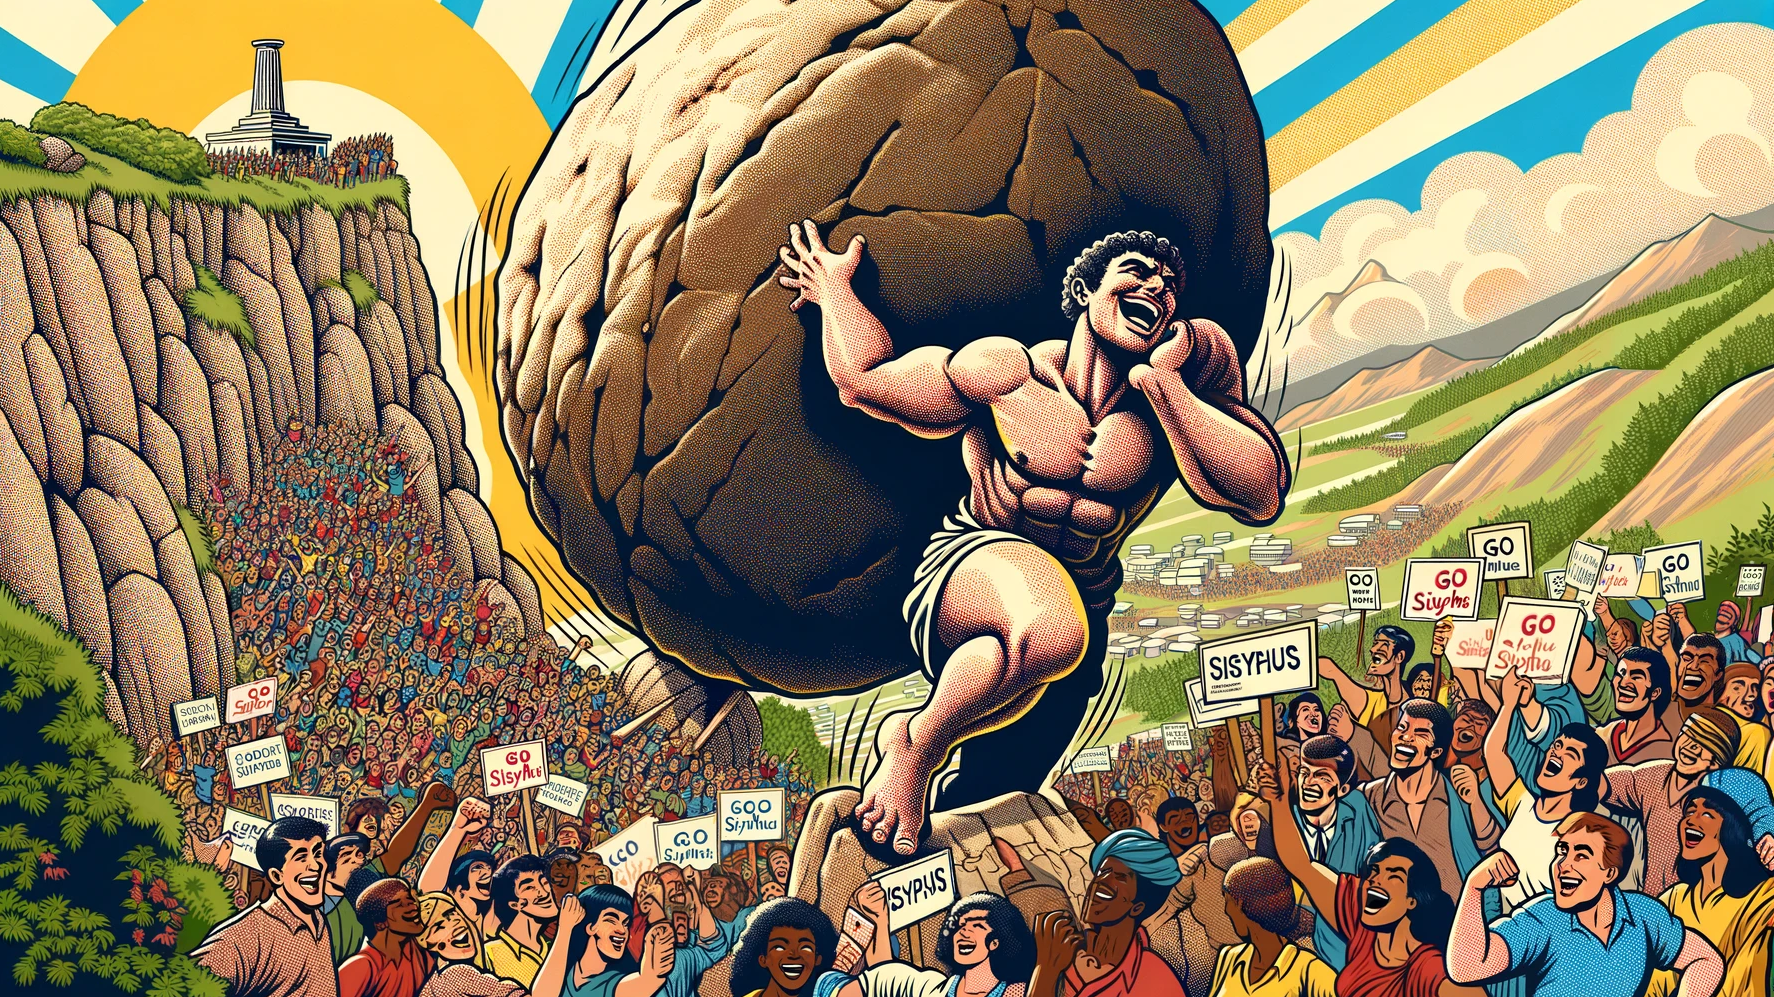 AI-generated image of a happy Sisyphus carrying a boulder, with a massive crowd cheering him on